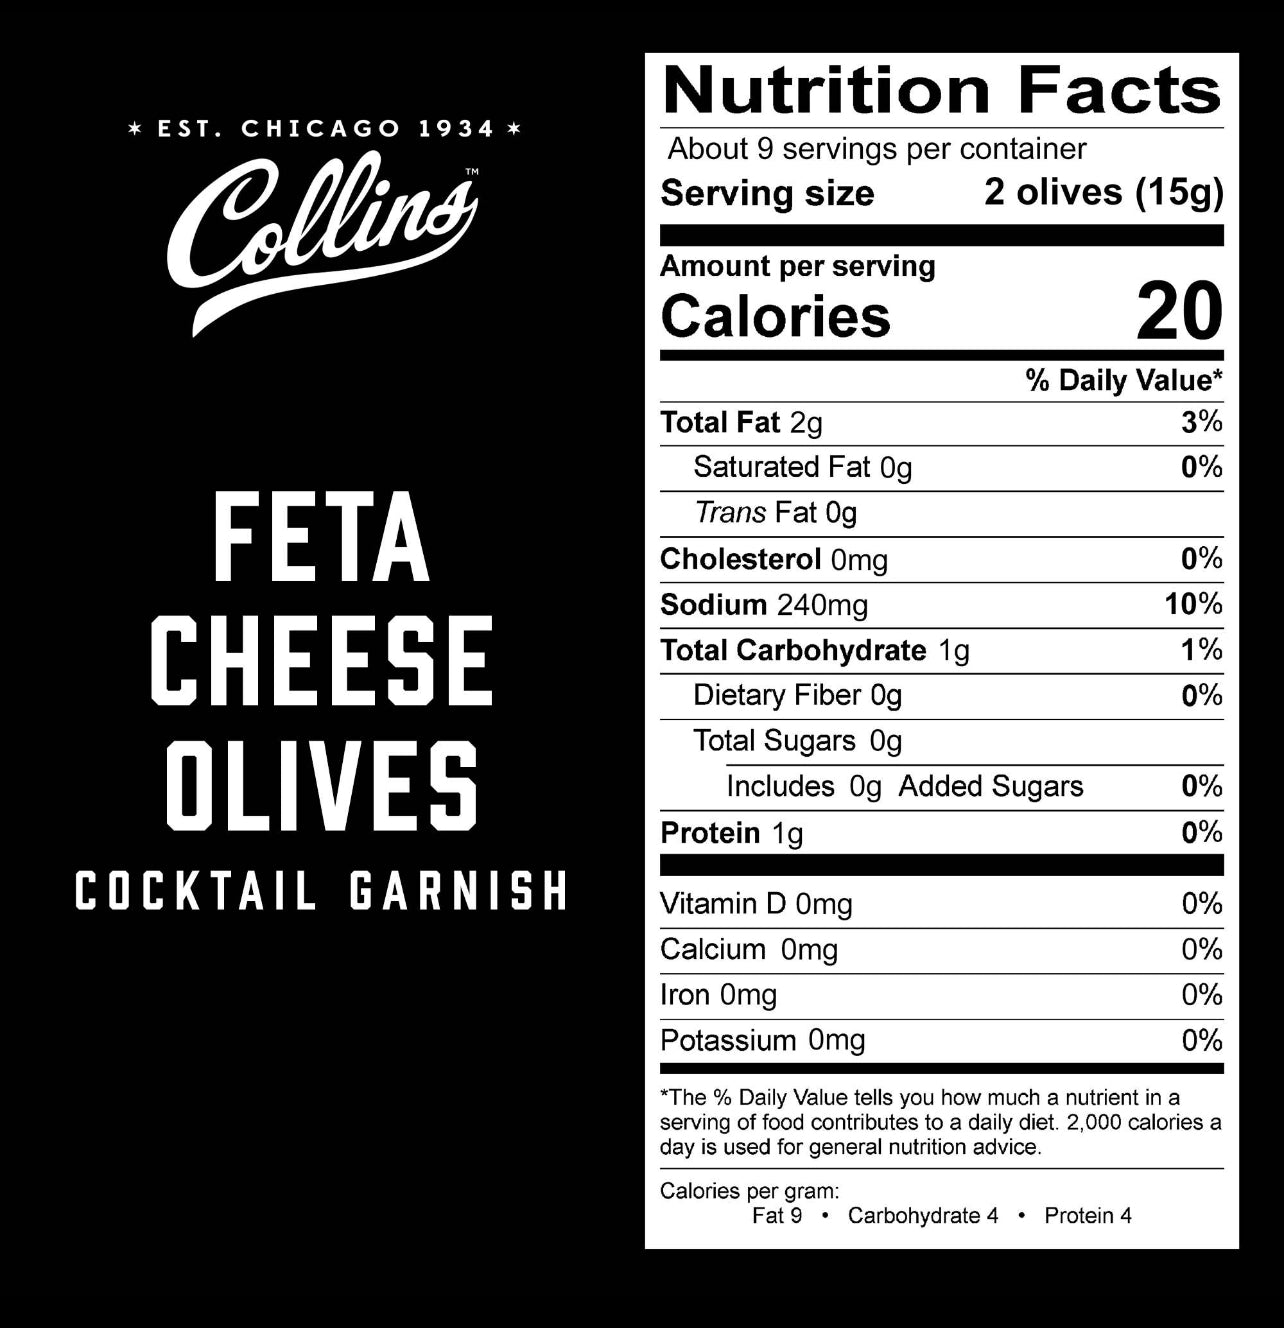 nutritional label for bottle of feta cheese gourmet olives cocktail garnish by Collins